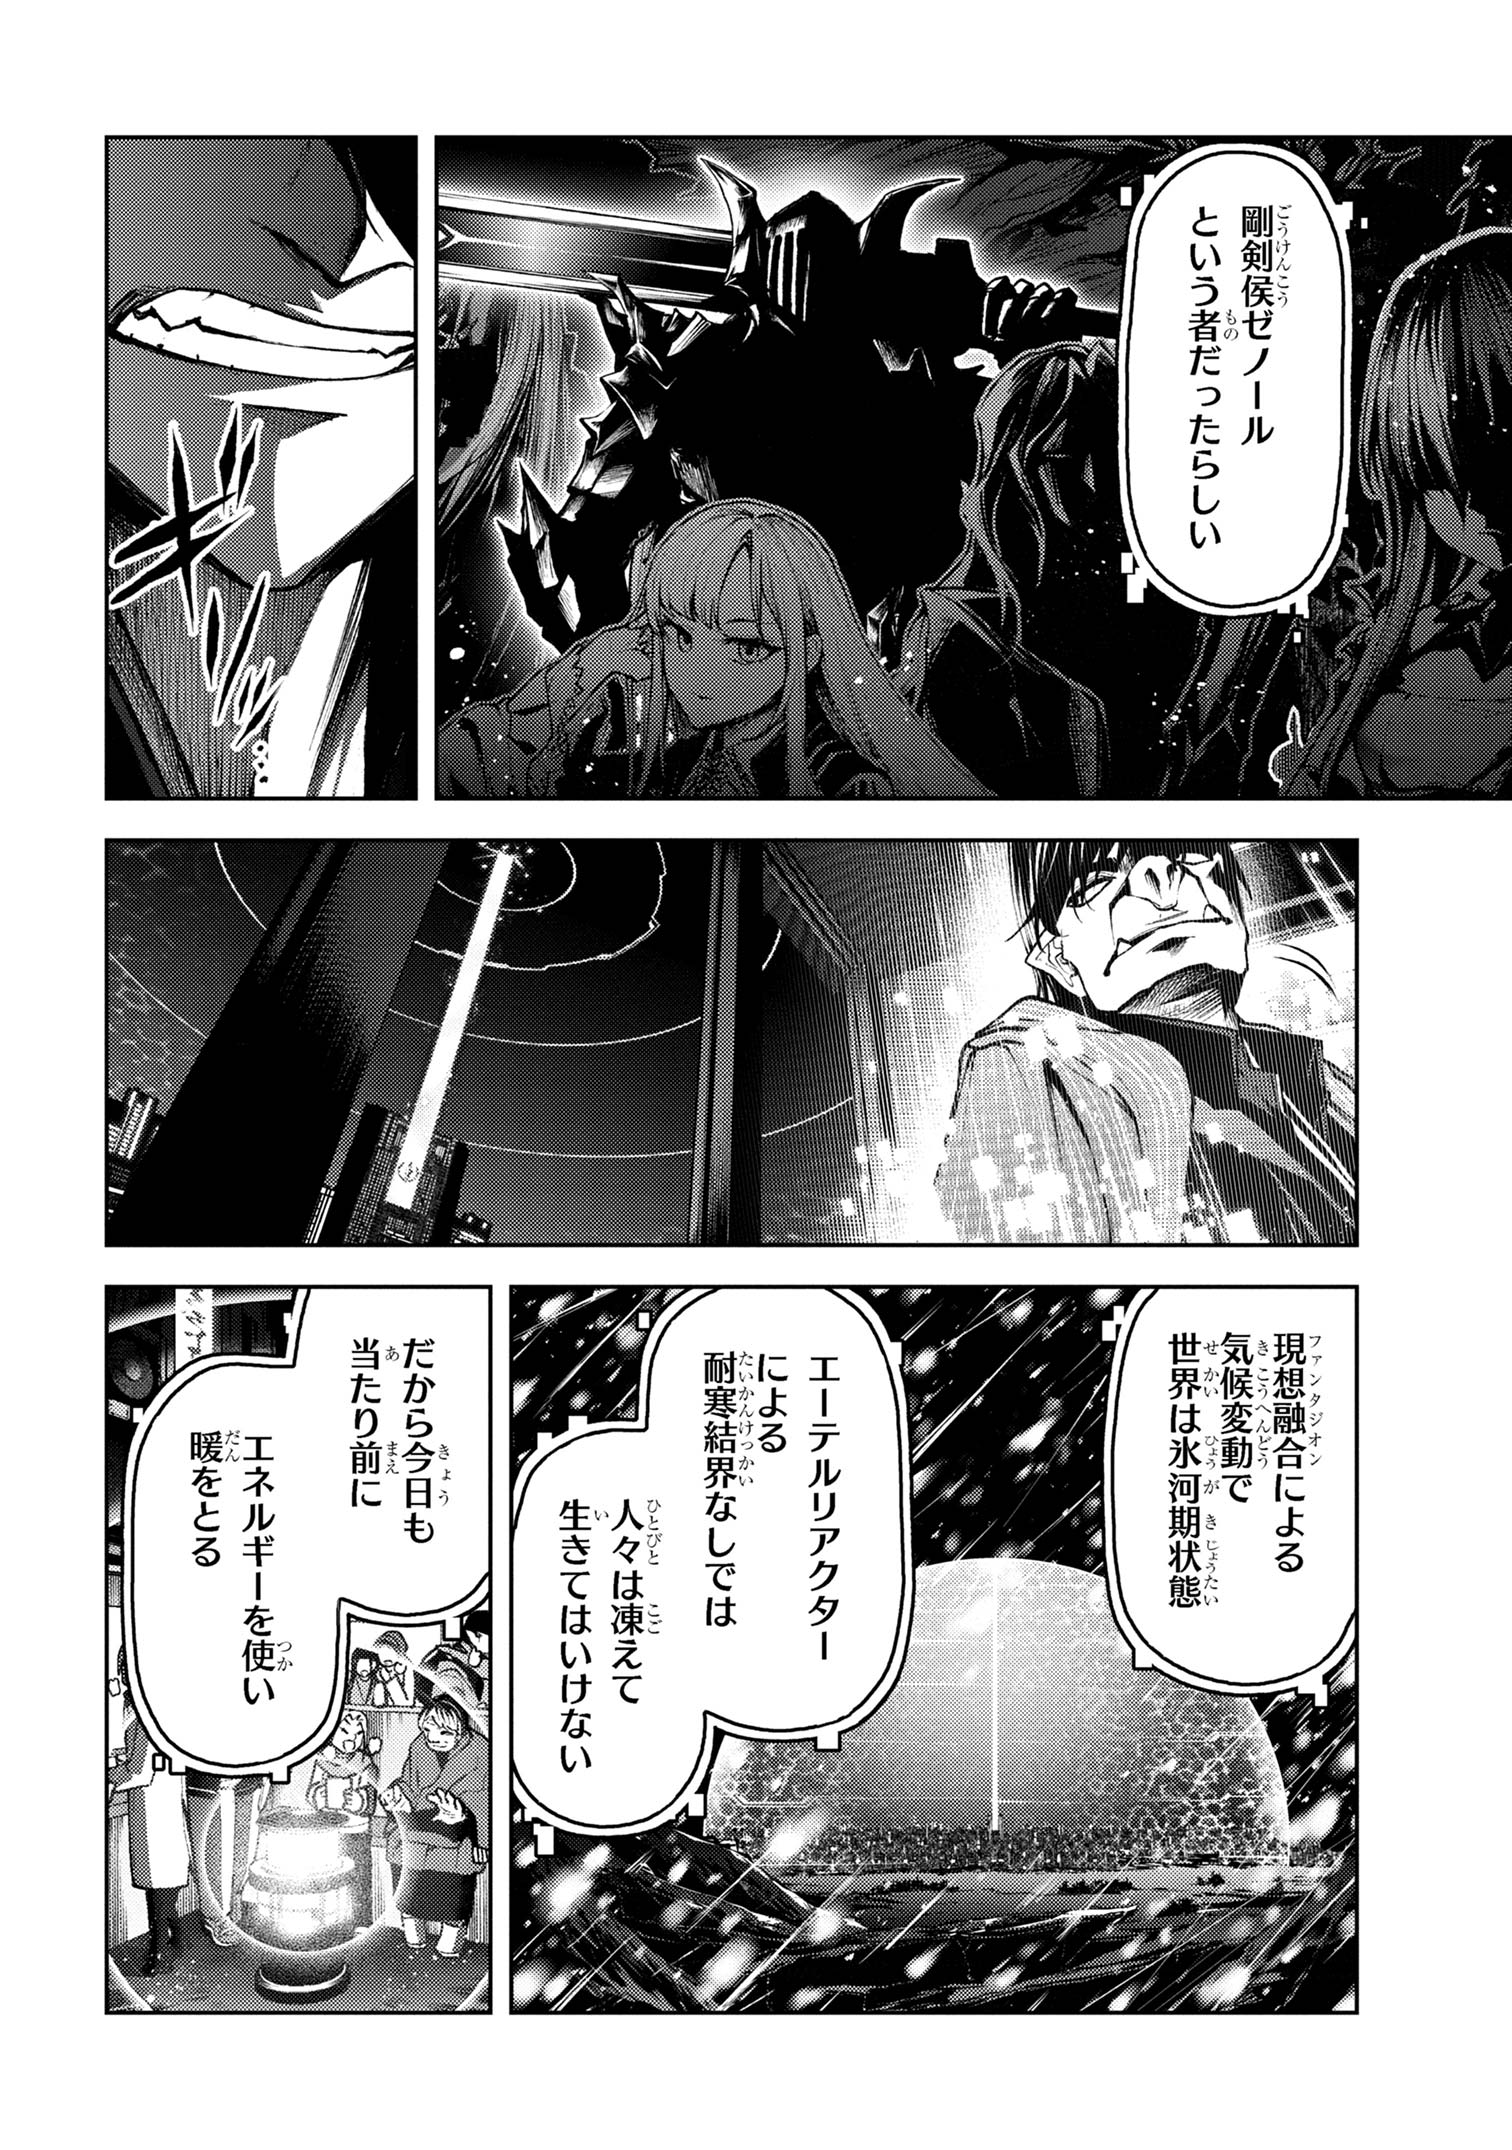 Maou 2099 - Chapter 7.2 - Page 7